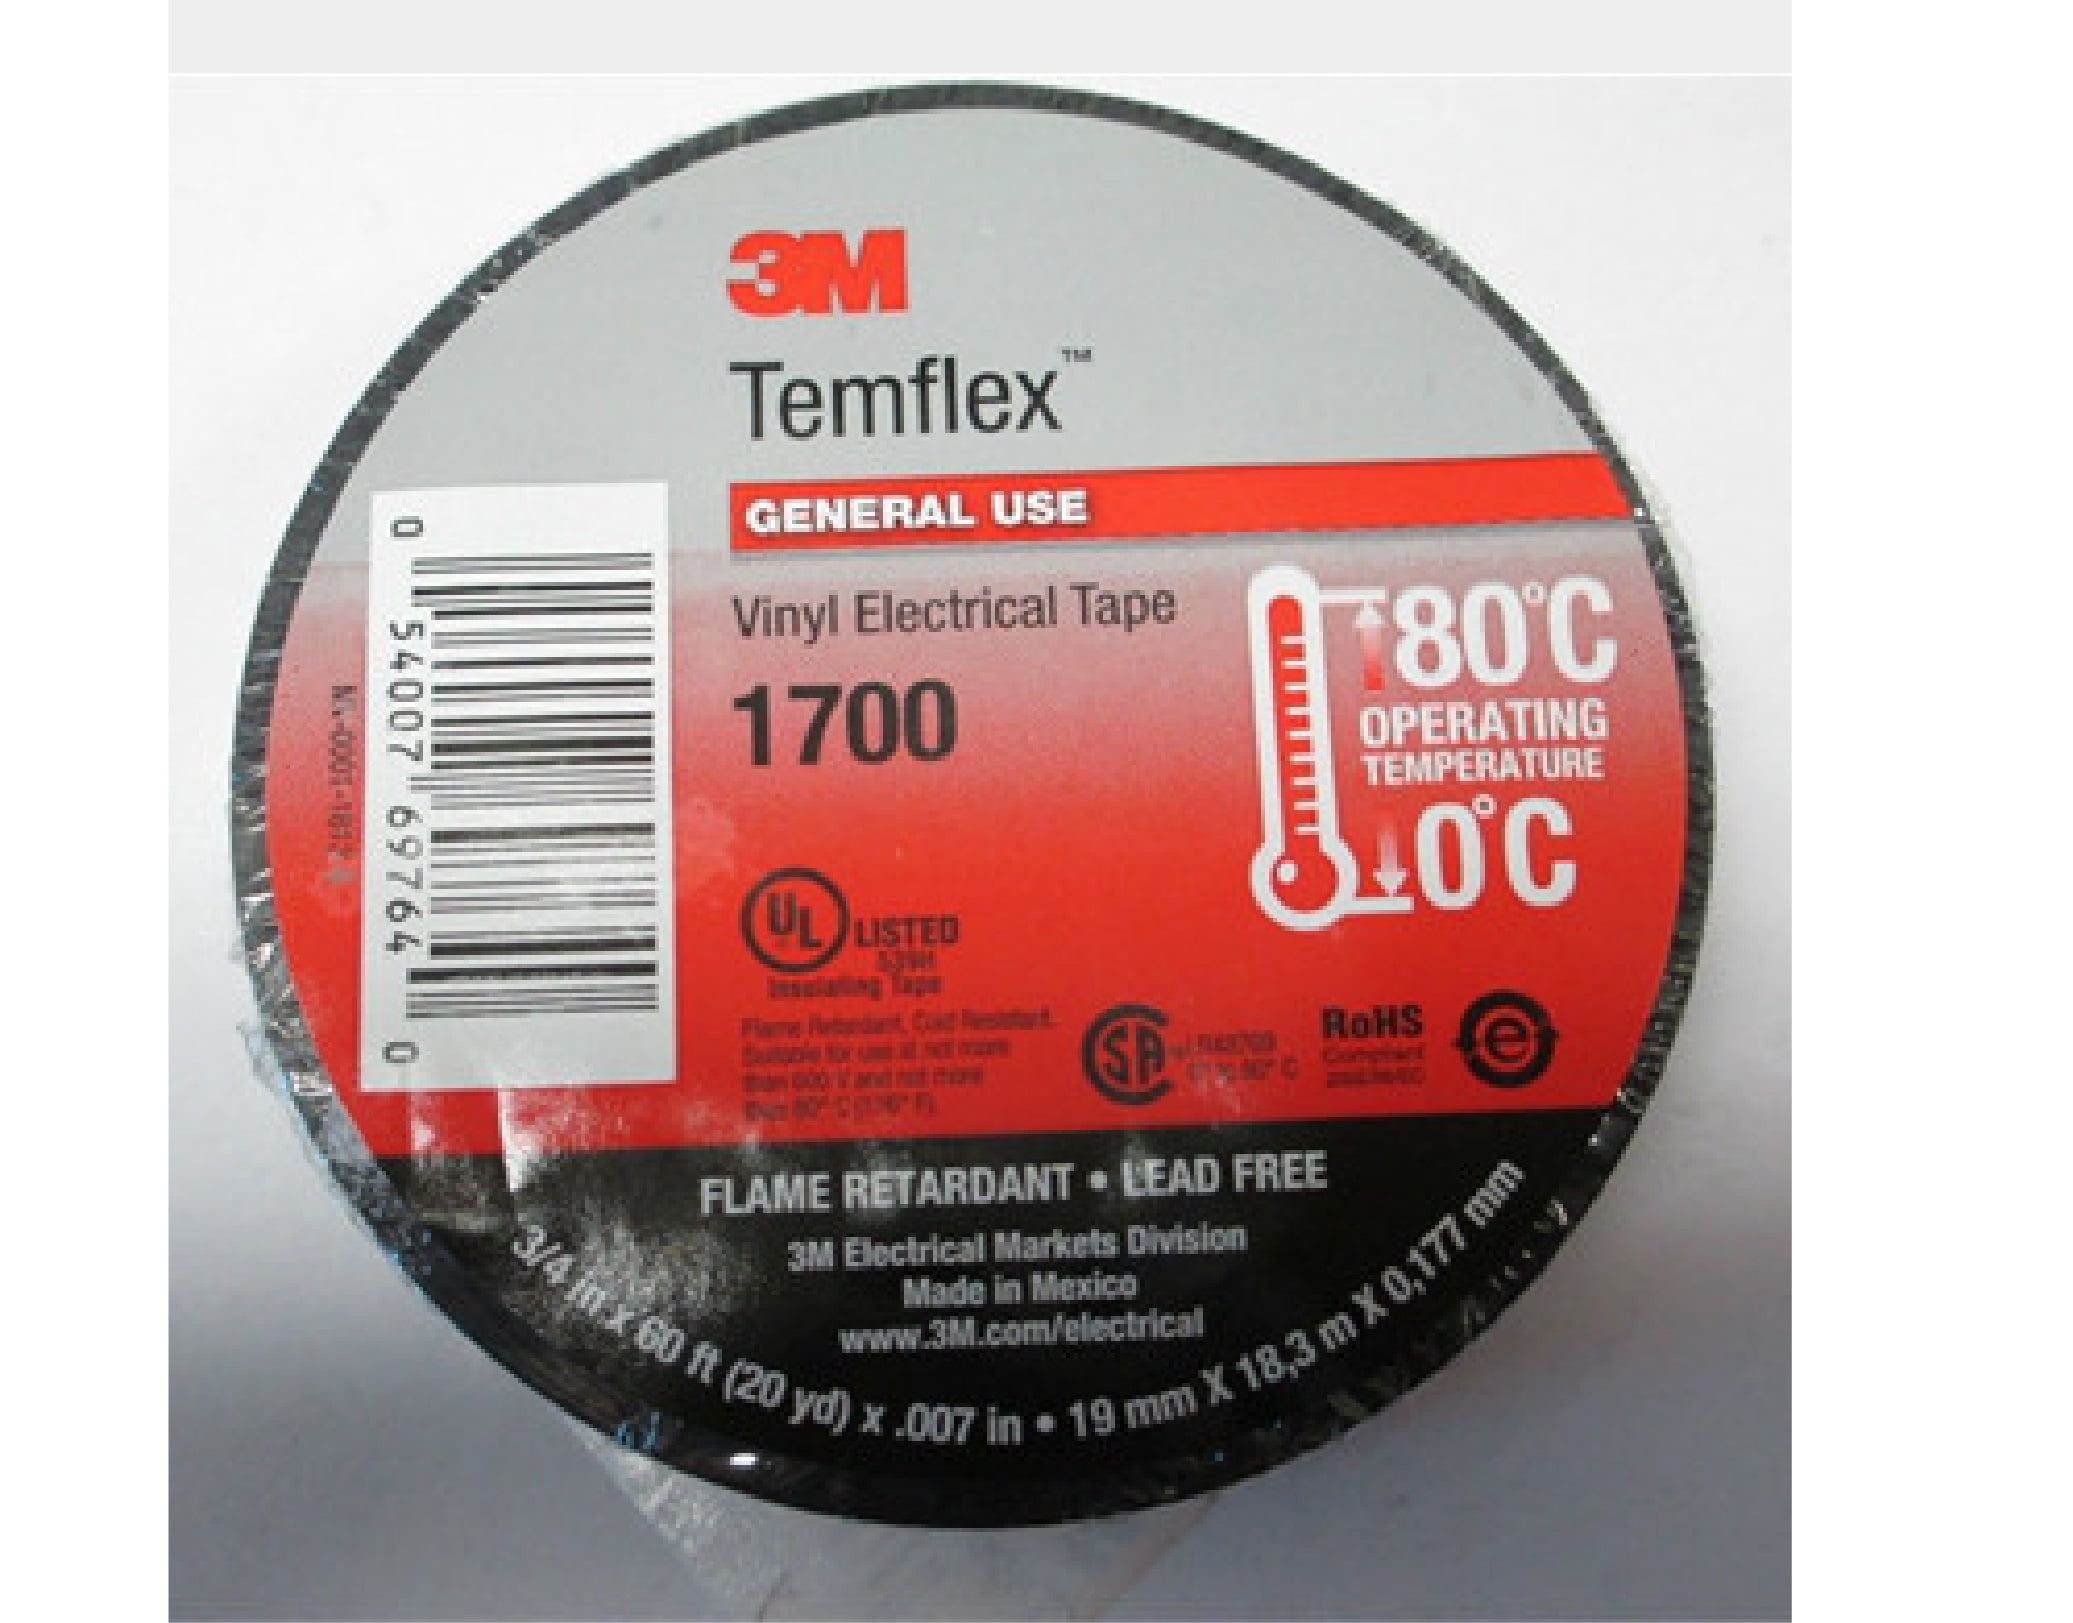 3M TEMFLEX 1700 ELECTRICAL TAPE BLACK 3//4 x 60 FT INSULATED FAST SHIP QTY 4